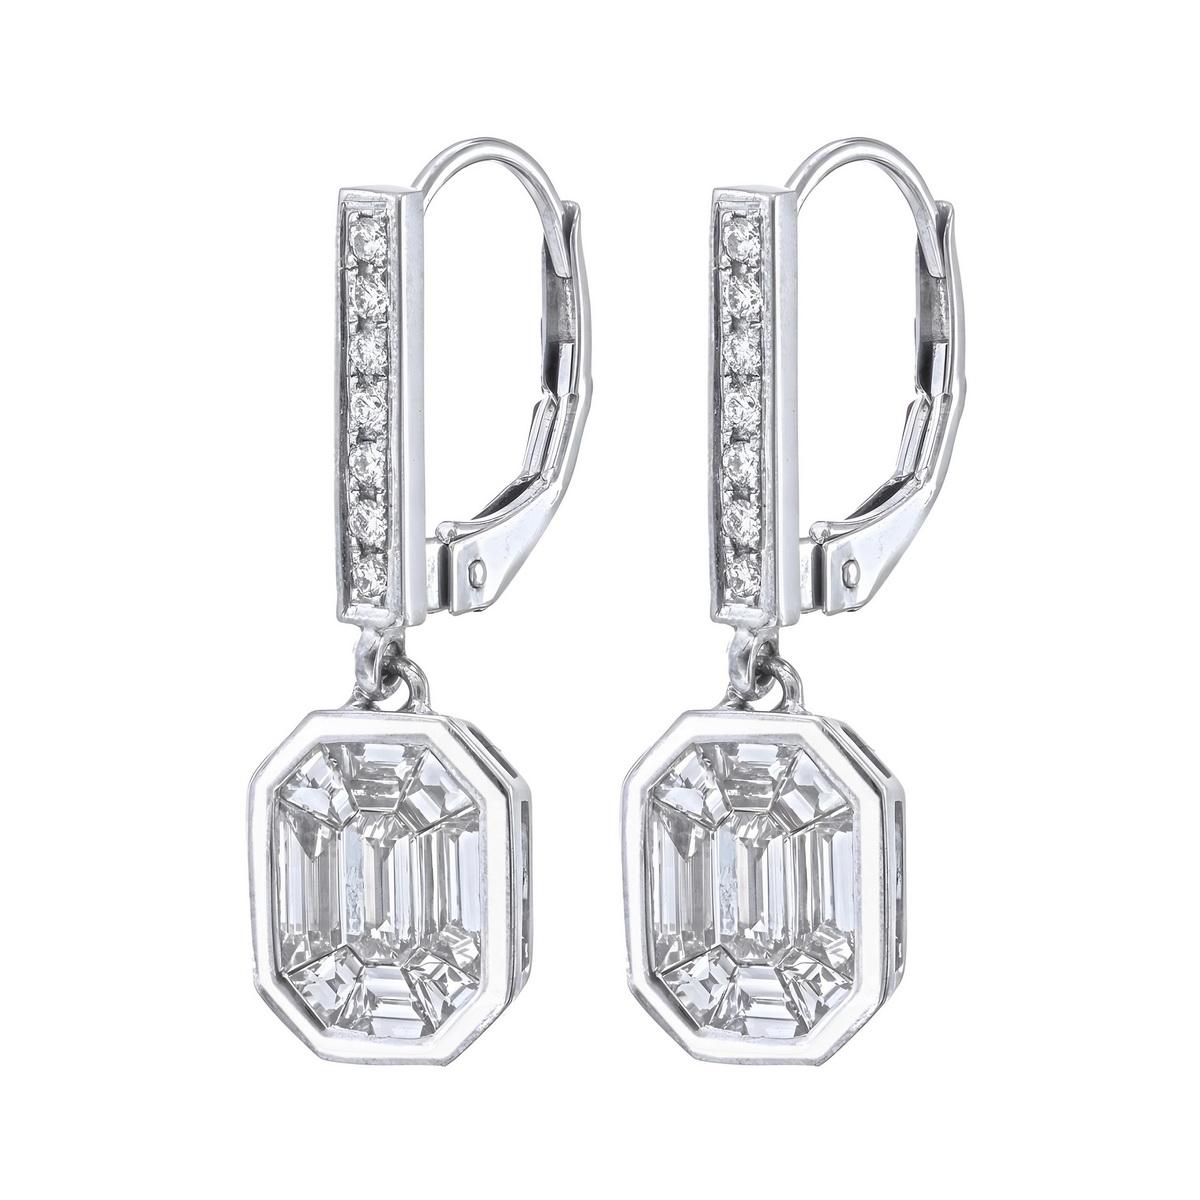 French lever back earrings with 2 carat face up Invisible set diamond earrings